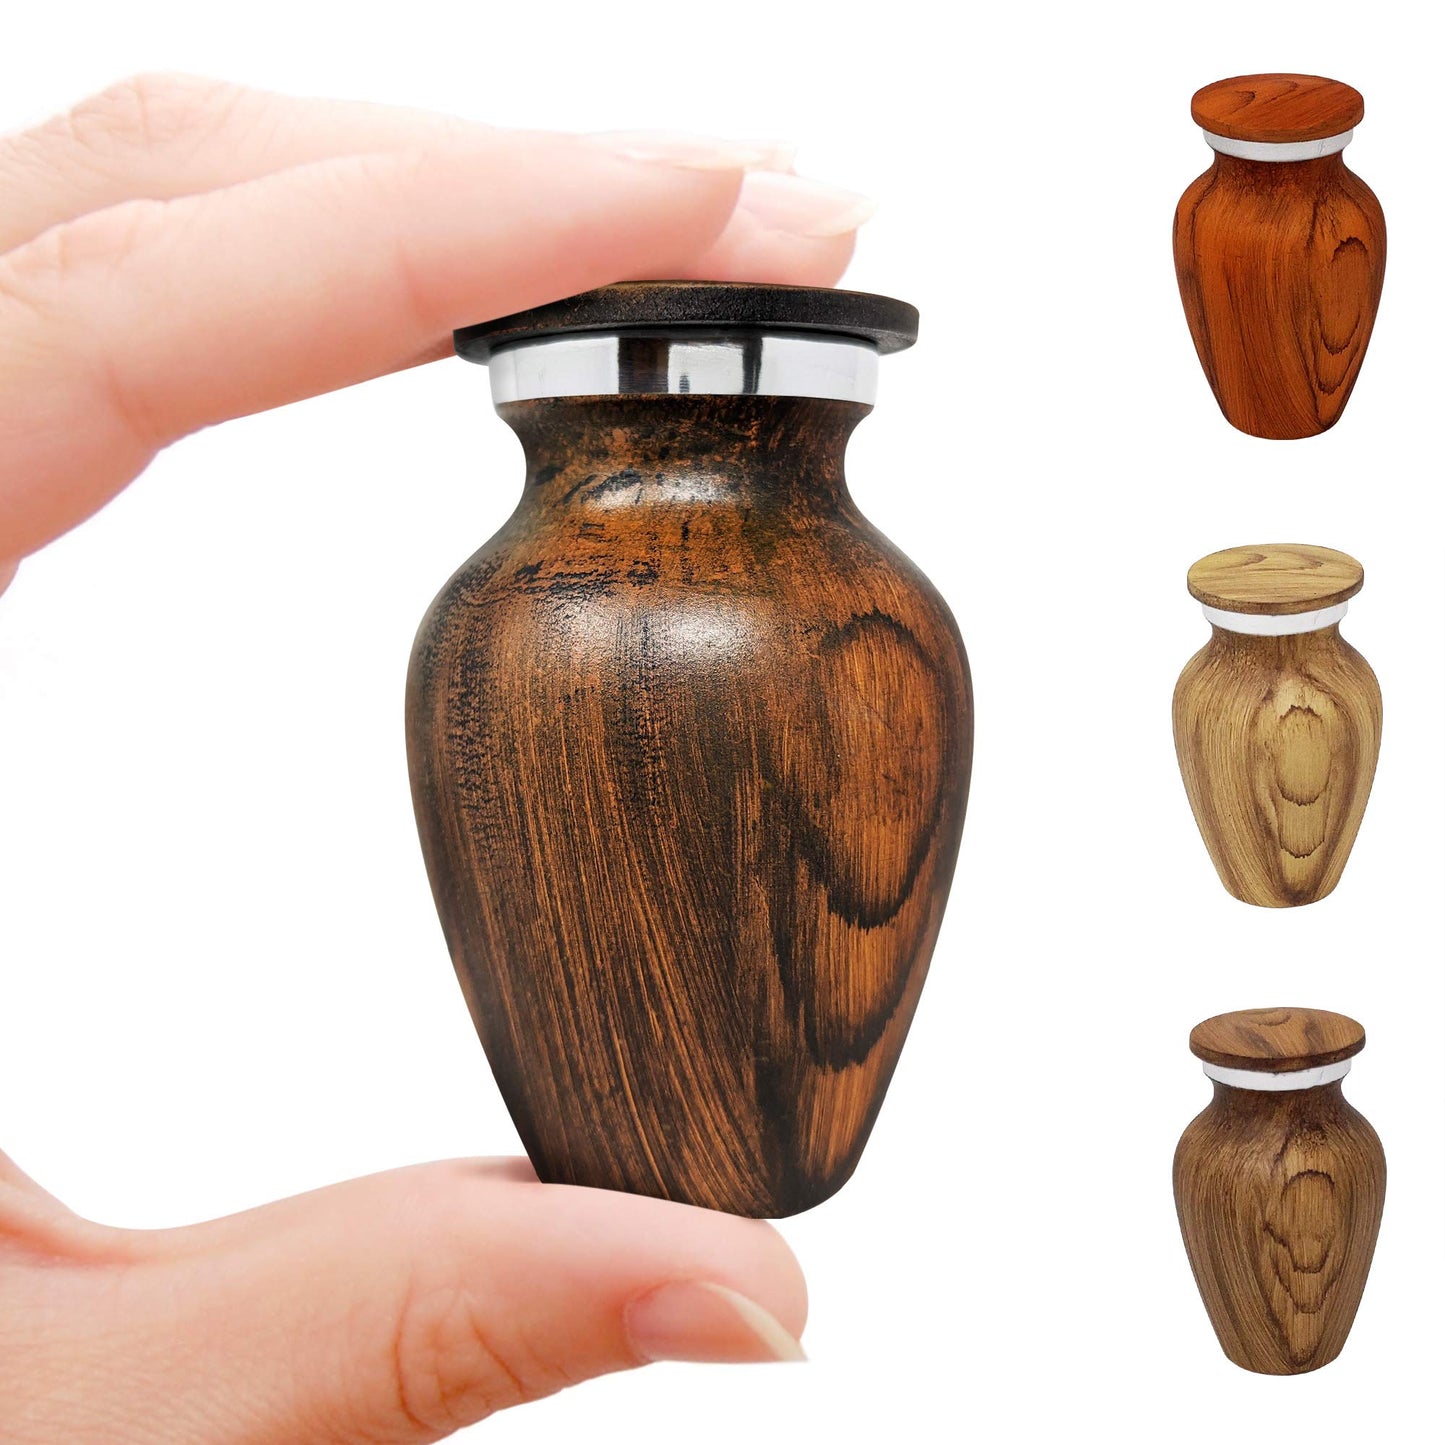 Small Keepsake Cremation Urn For Human Ashes With Wood Grain Finish Choose From 4 Unique Woodgrains Mini Metal Sharing Personal Funeral Urn for Pet or Human Ashes (Red Cherry)